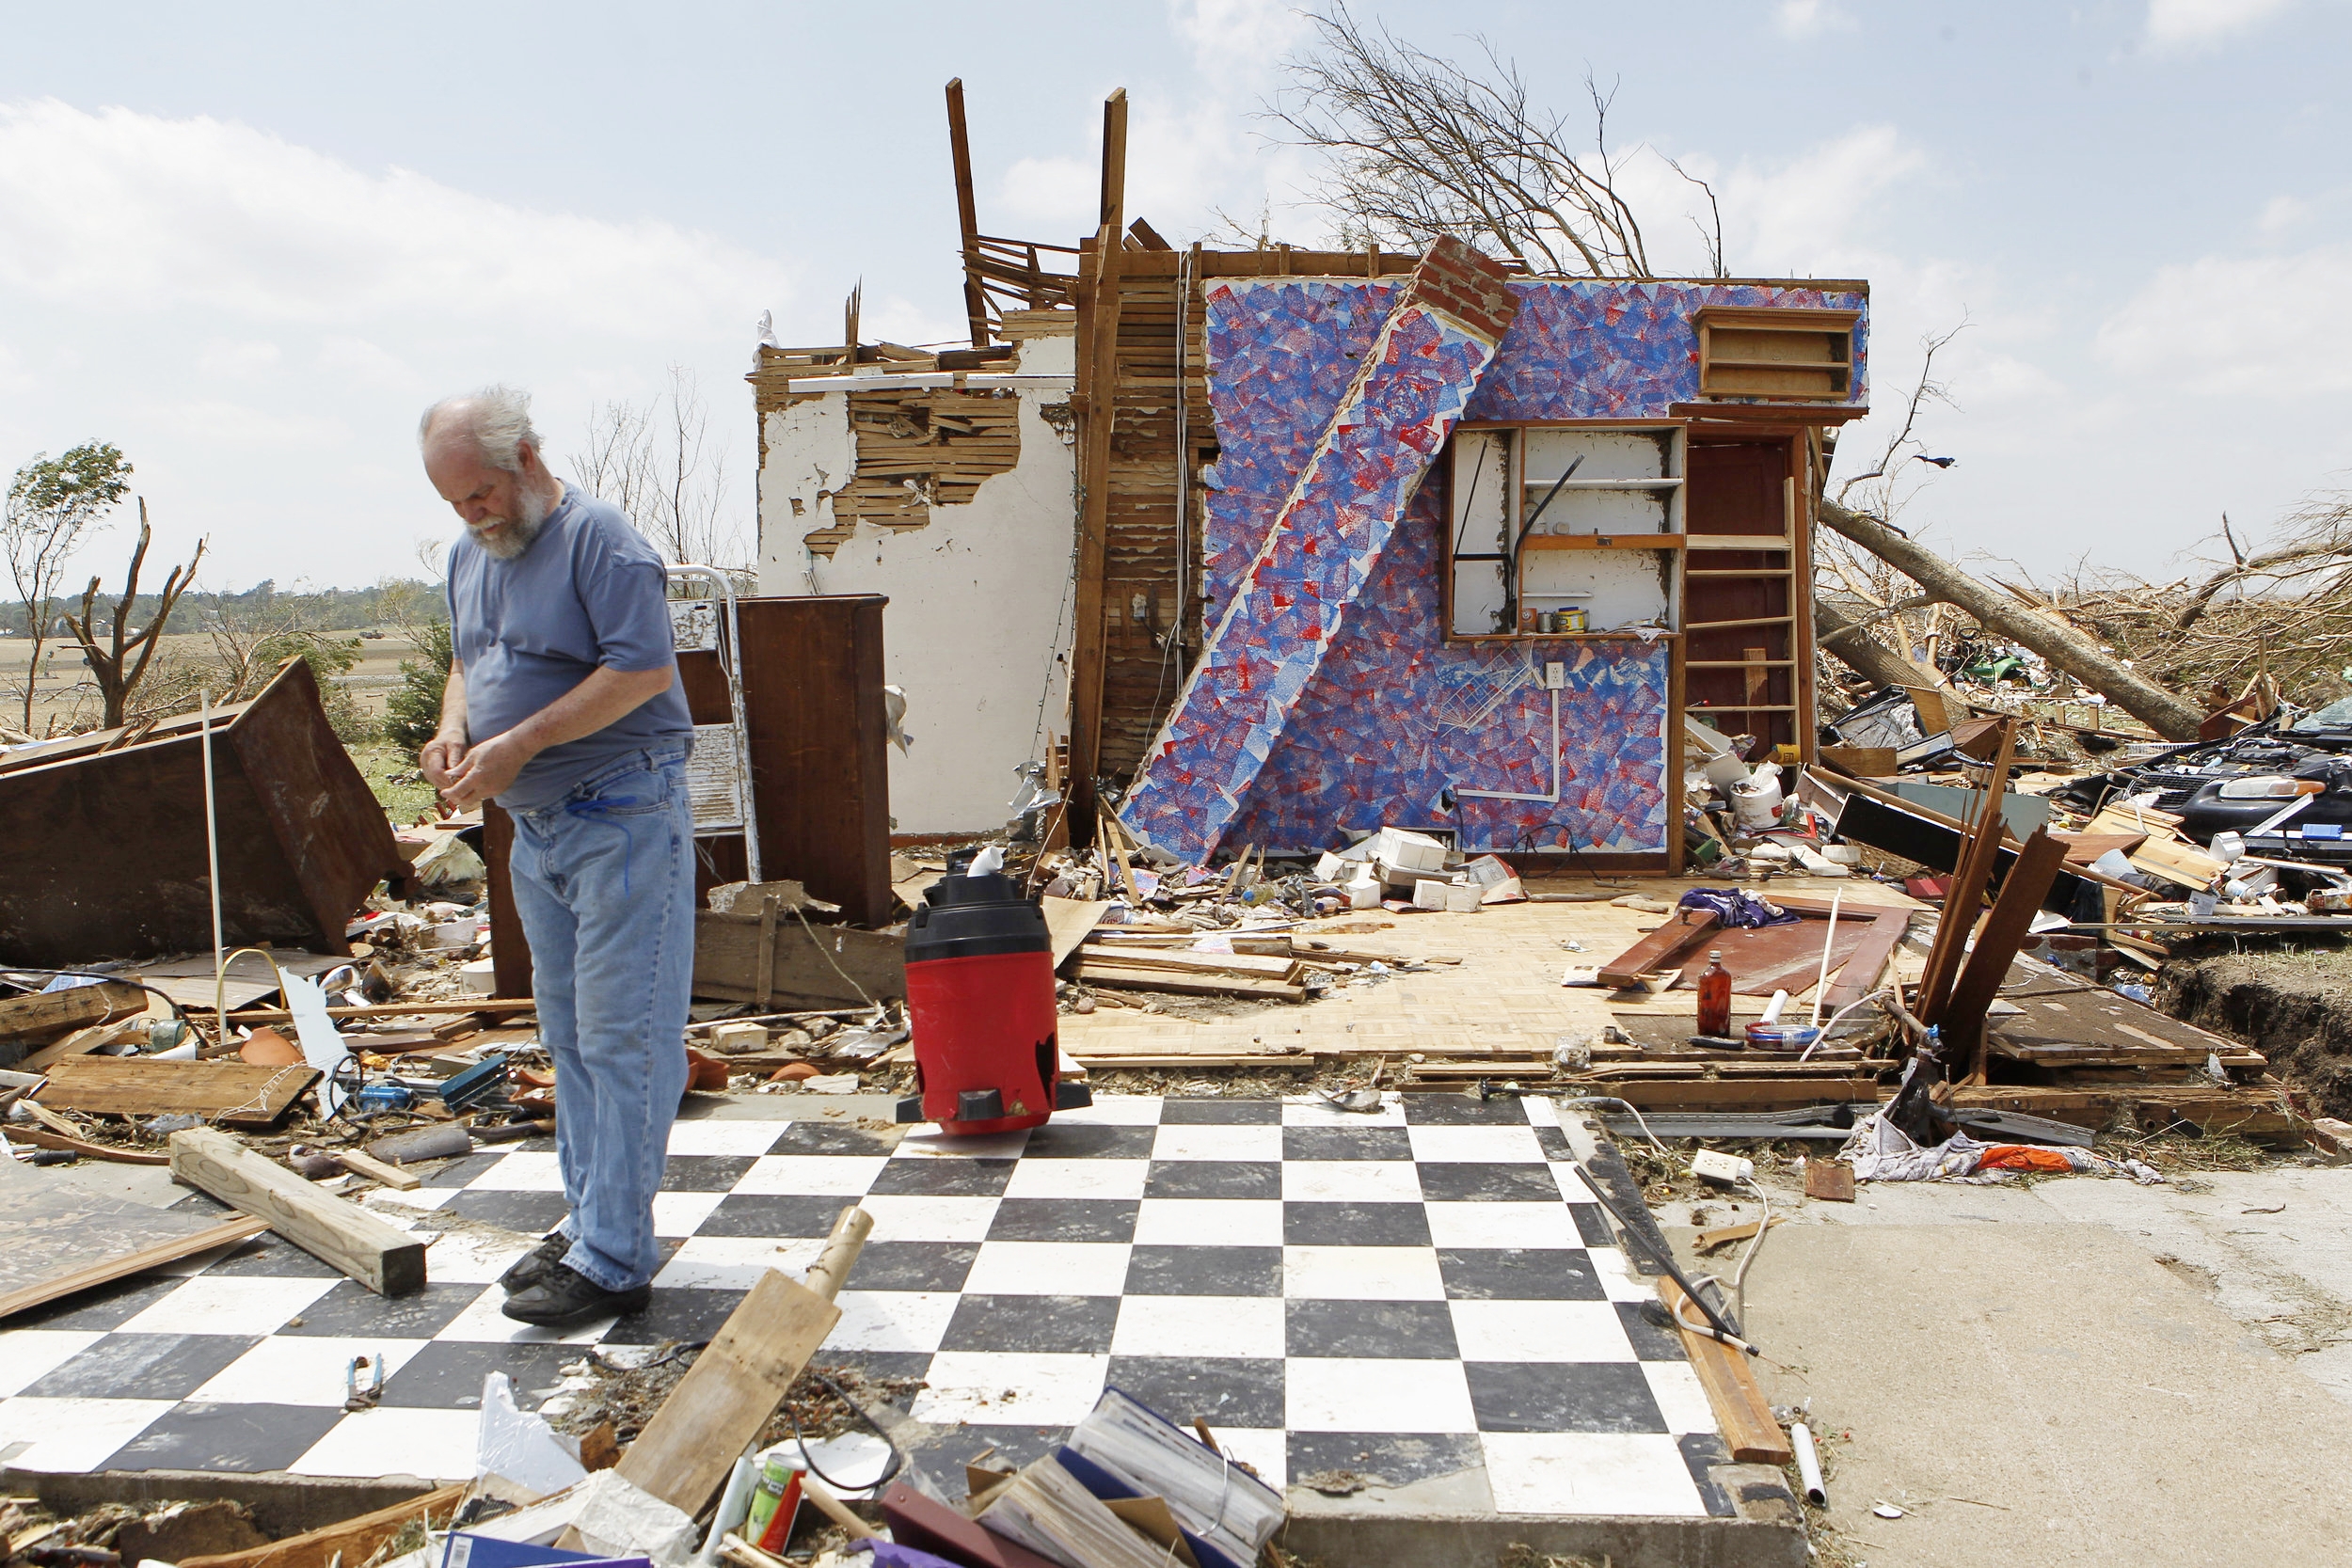  Greg Dunn looks through his scattered belongings on June 18, 2014, after his house was hit by a tornado near Coleridge, Neb. Within the same week Dunn lost his home to an EF3 tornado and lost his wife of 38 years, Diane, to a heart attack. 